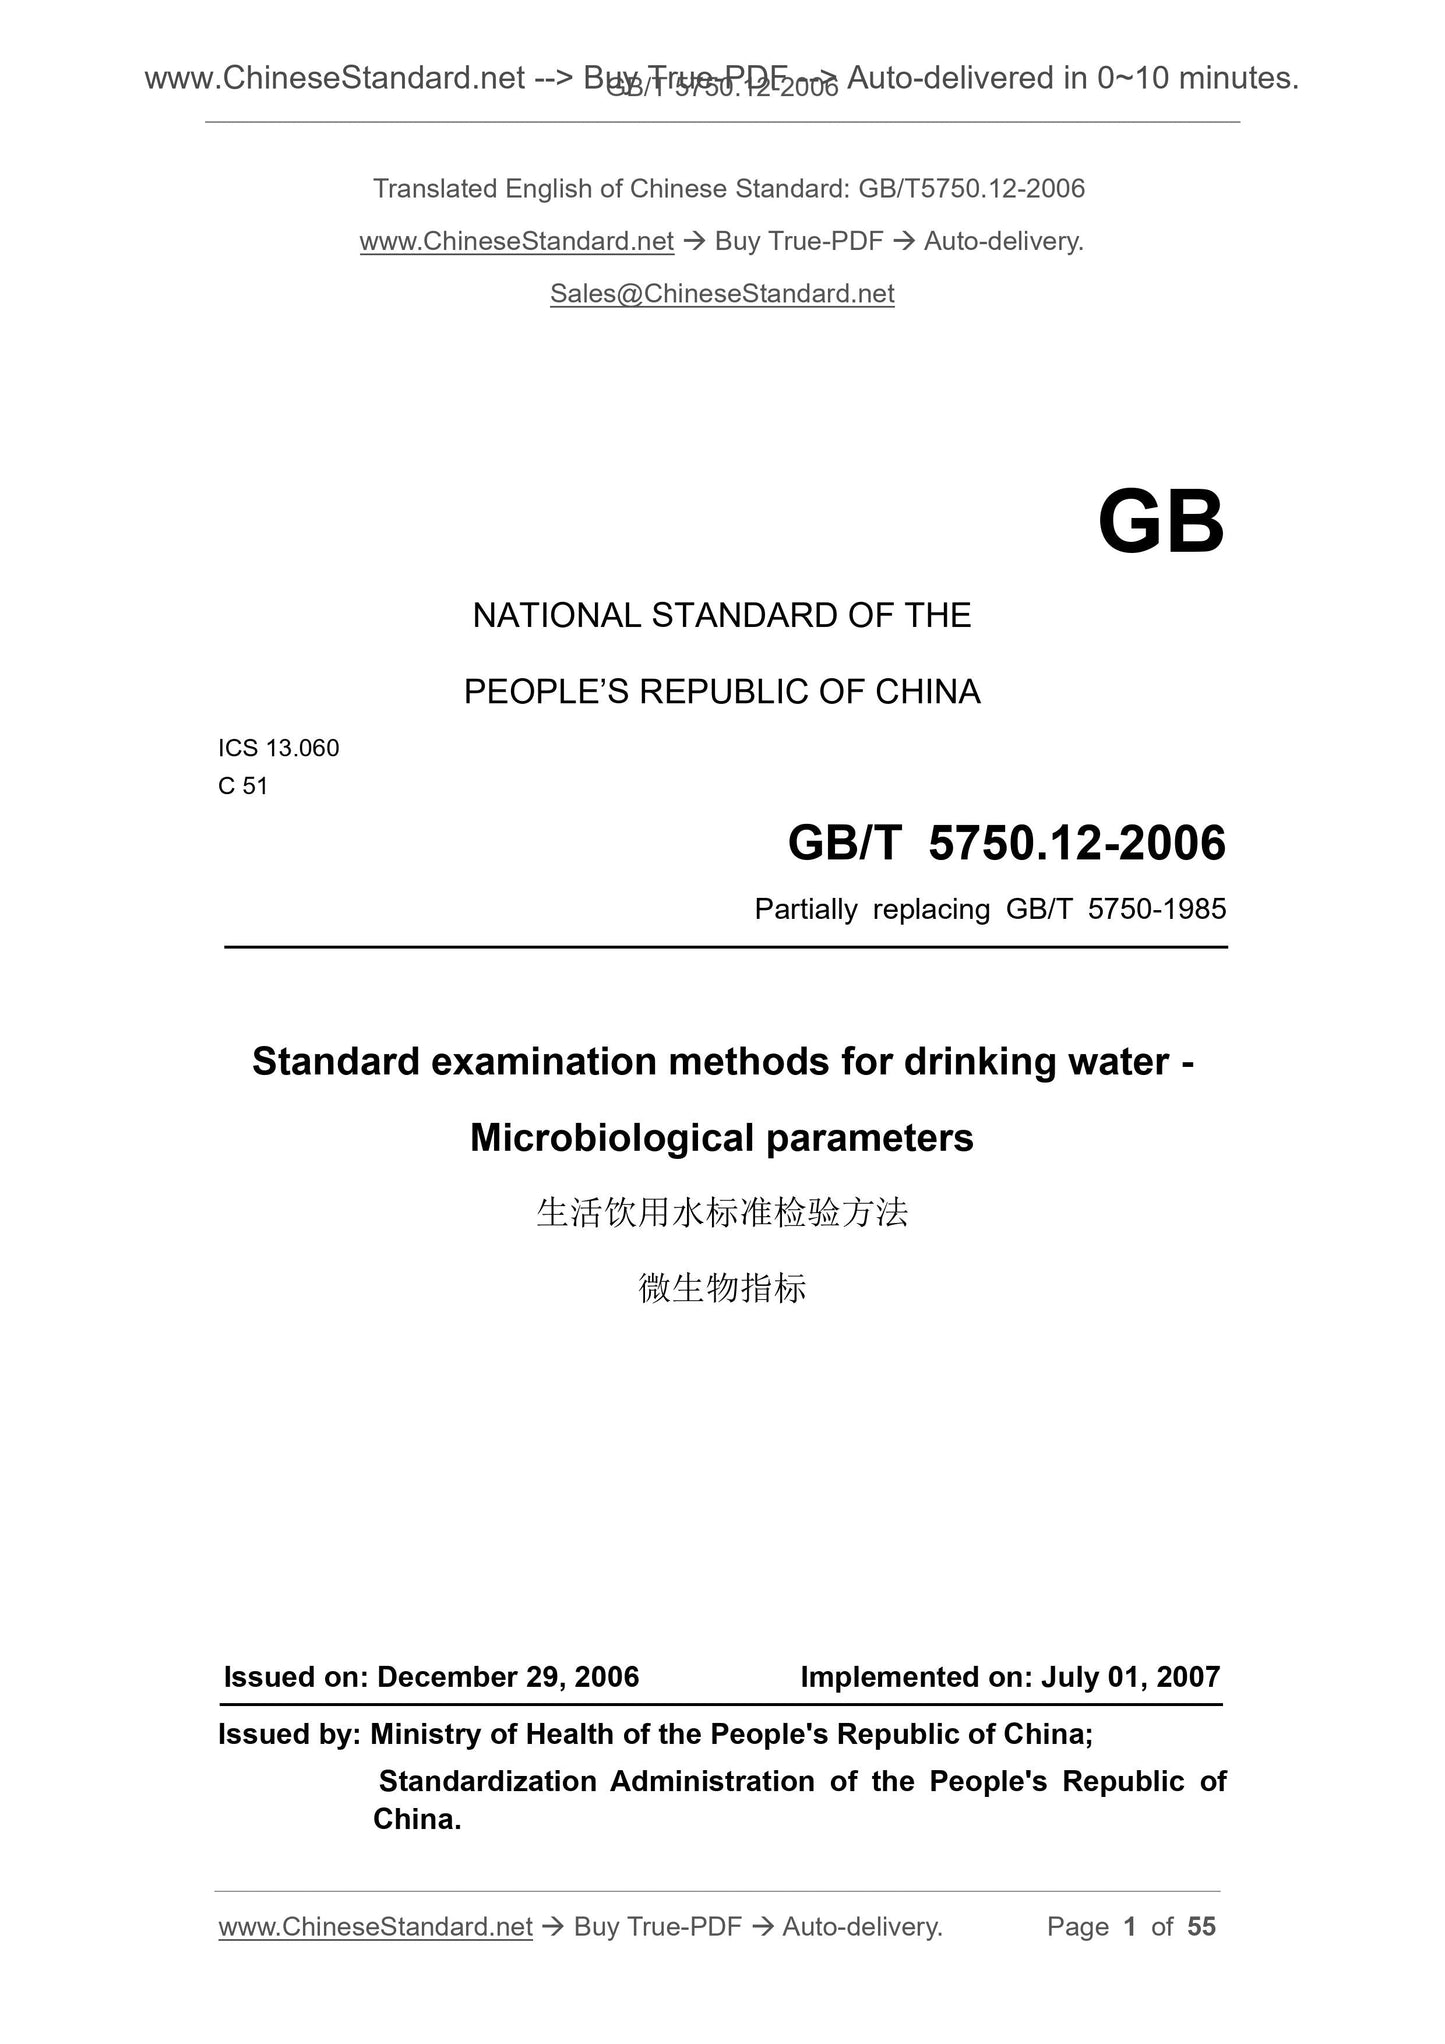 GB/T 5750.12-2006 Page 1